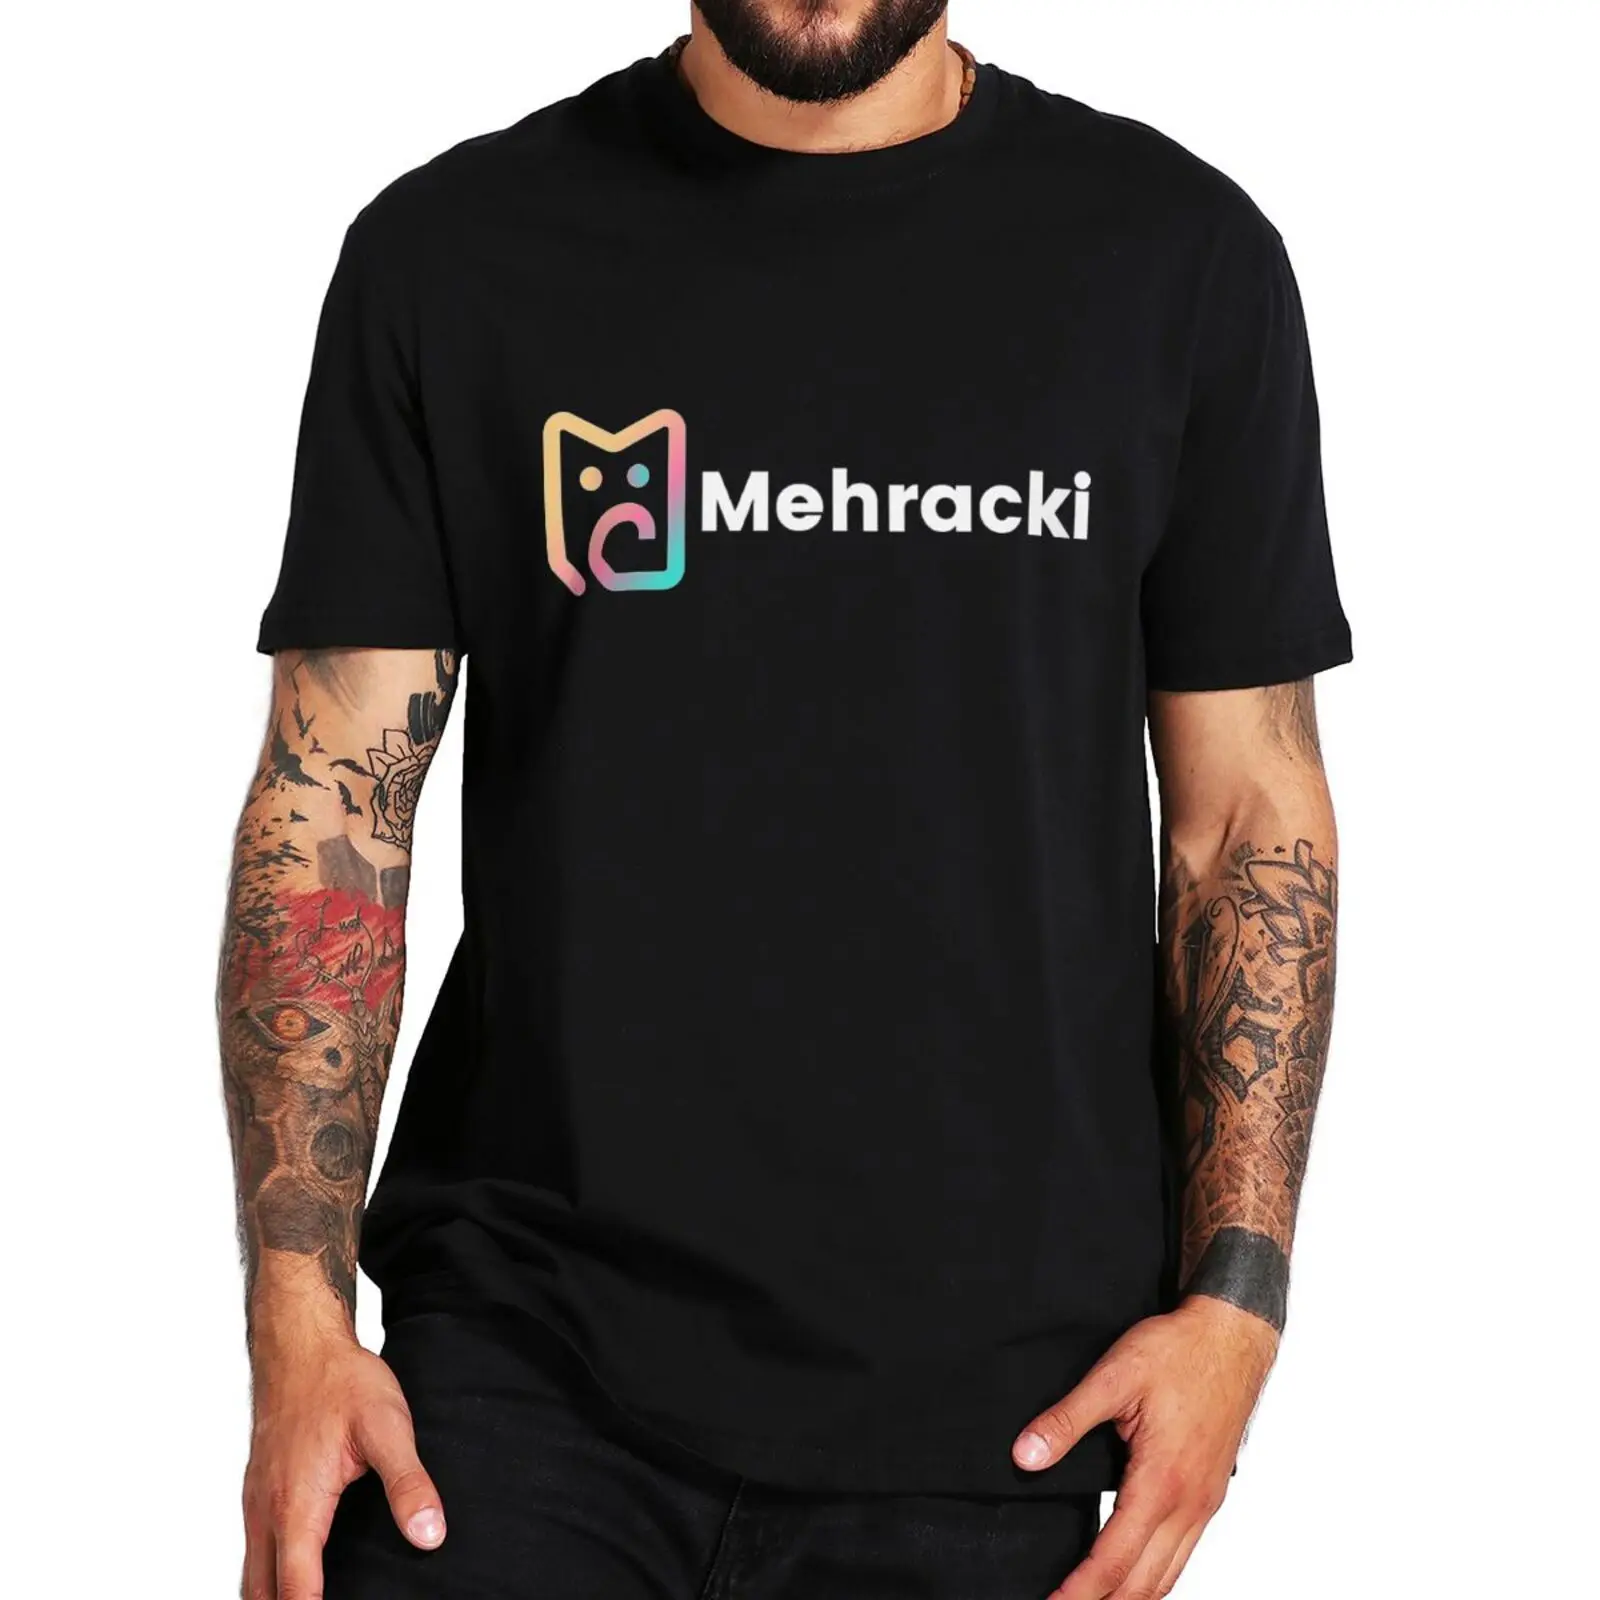 

Mehracki Crypto T-shirt Meme Coin Cryptocurrency Blockchain Tee Tops Summer 100% Cotton EU Size Casual Oversized Unisex T Shirt